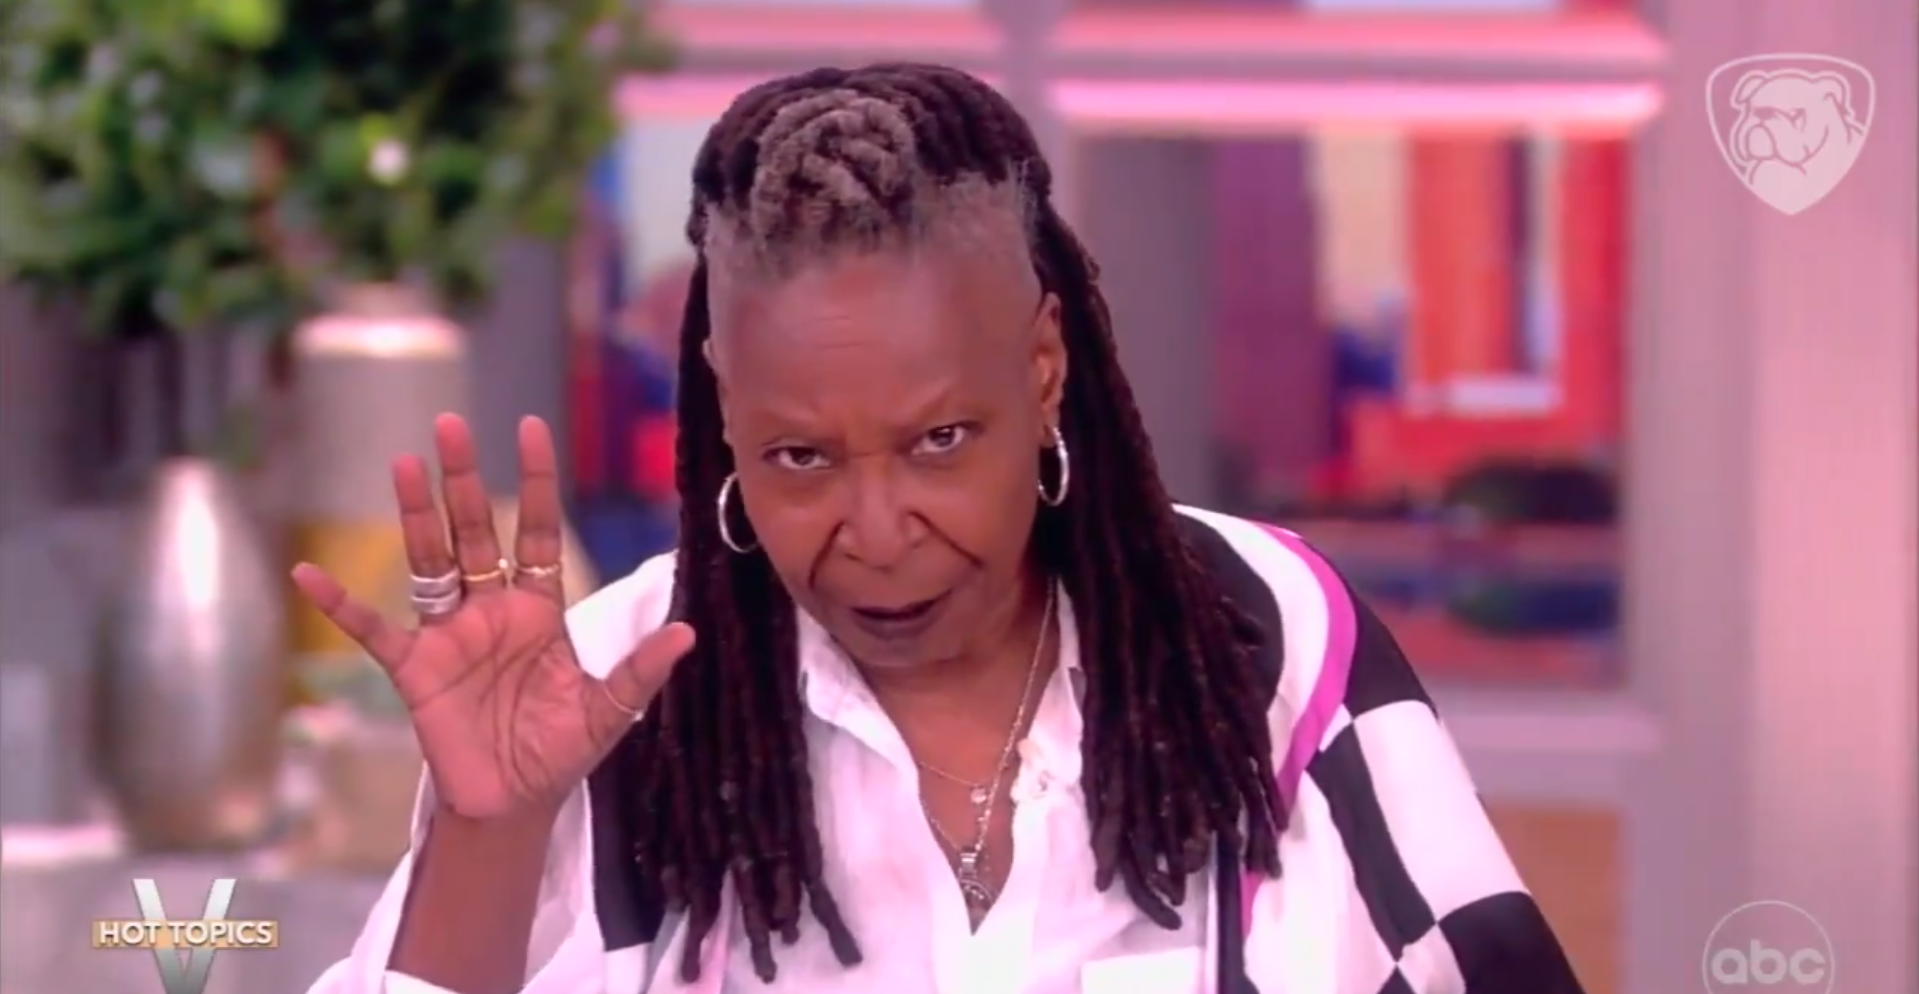 ‘How Dare You’: Whoopi Goldberg Blasts Trump for Speaking About ‘Anti-White’ Sentiment